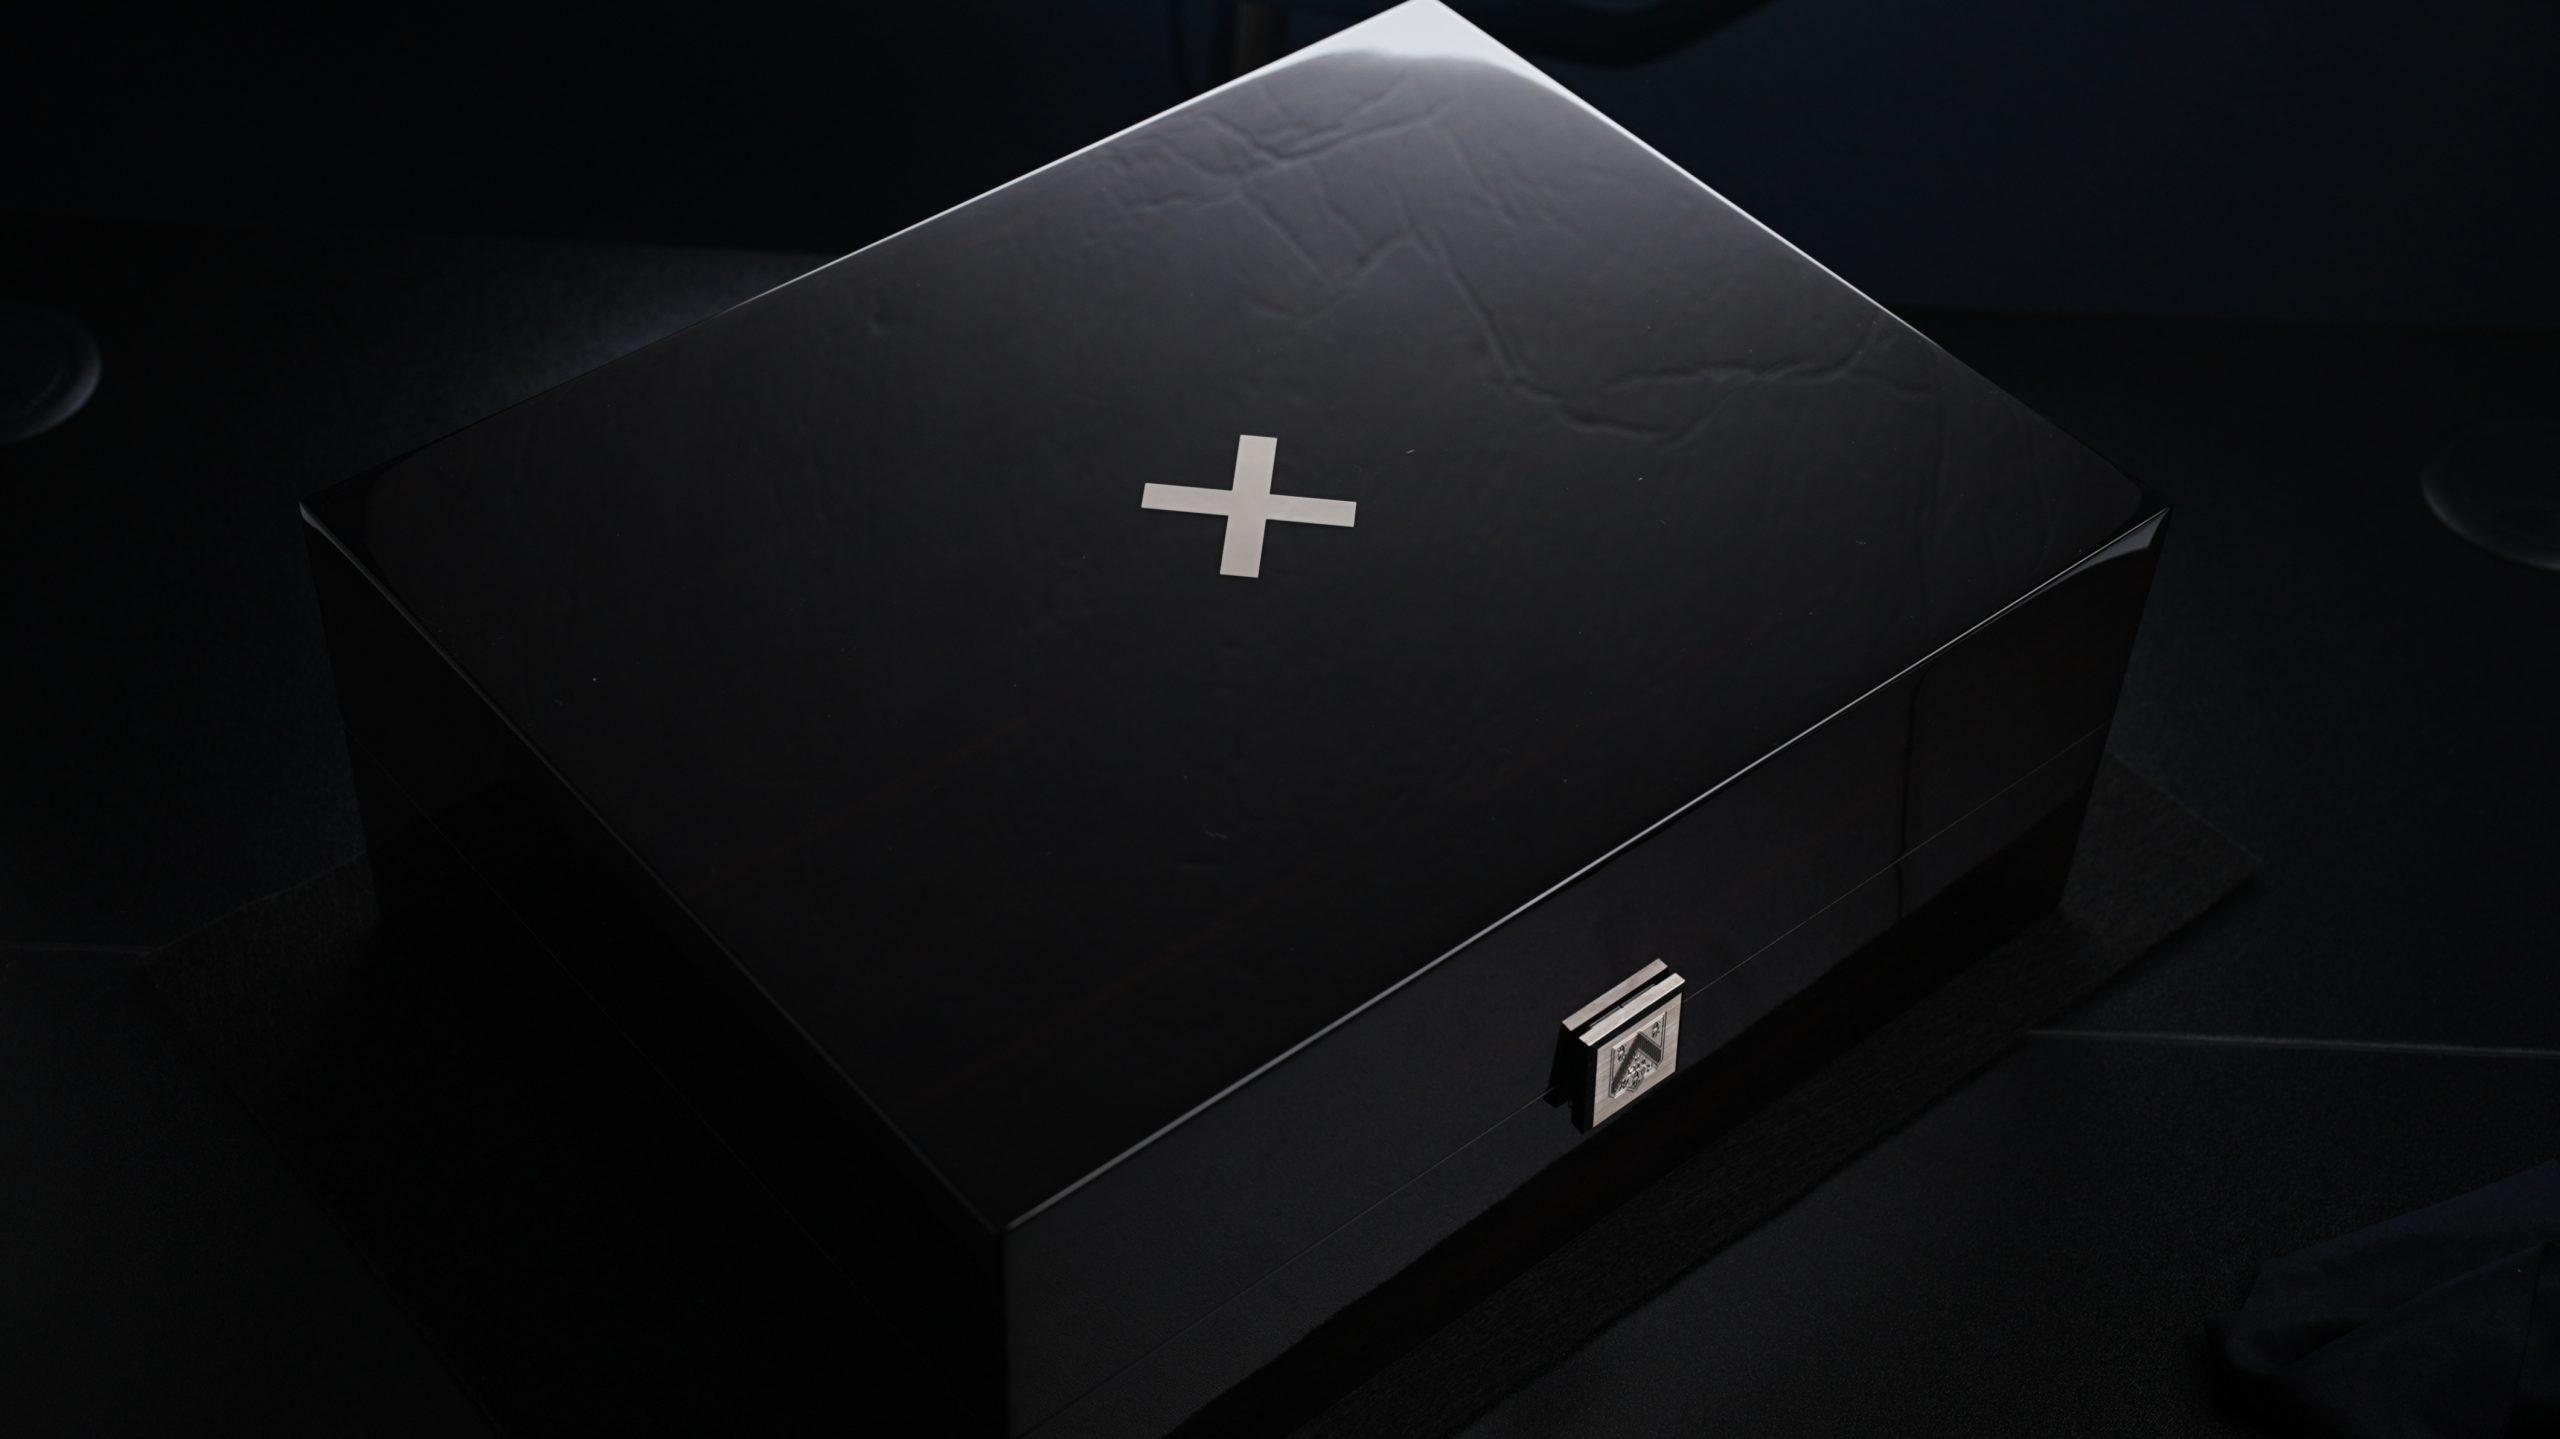 H.Moser & Cie. Confidential Project X Concept Vanta Black mystery box with "X" on the top.